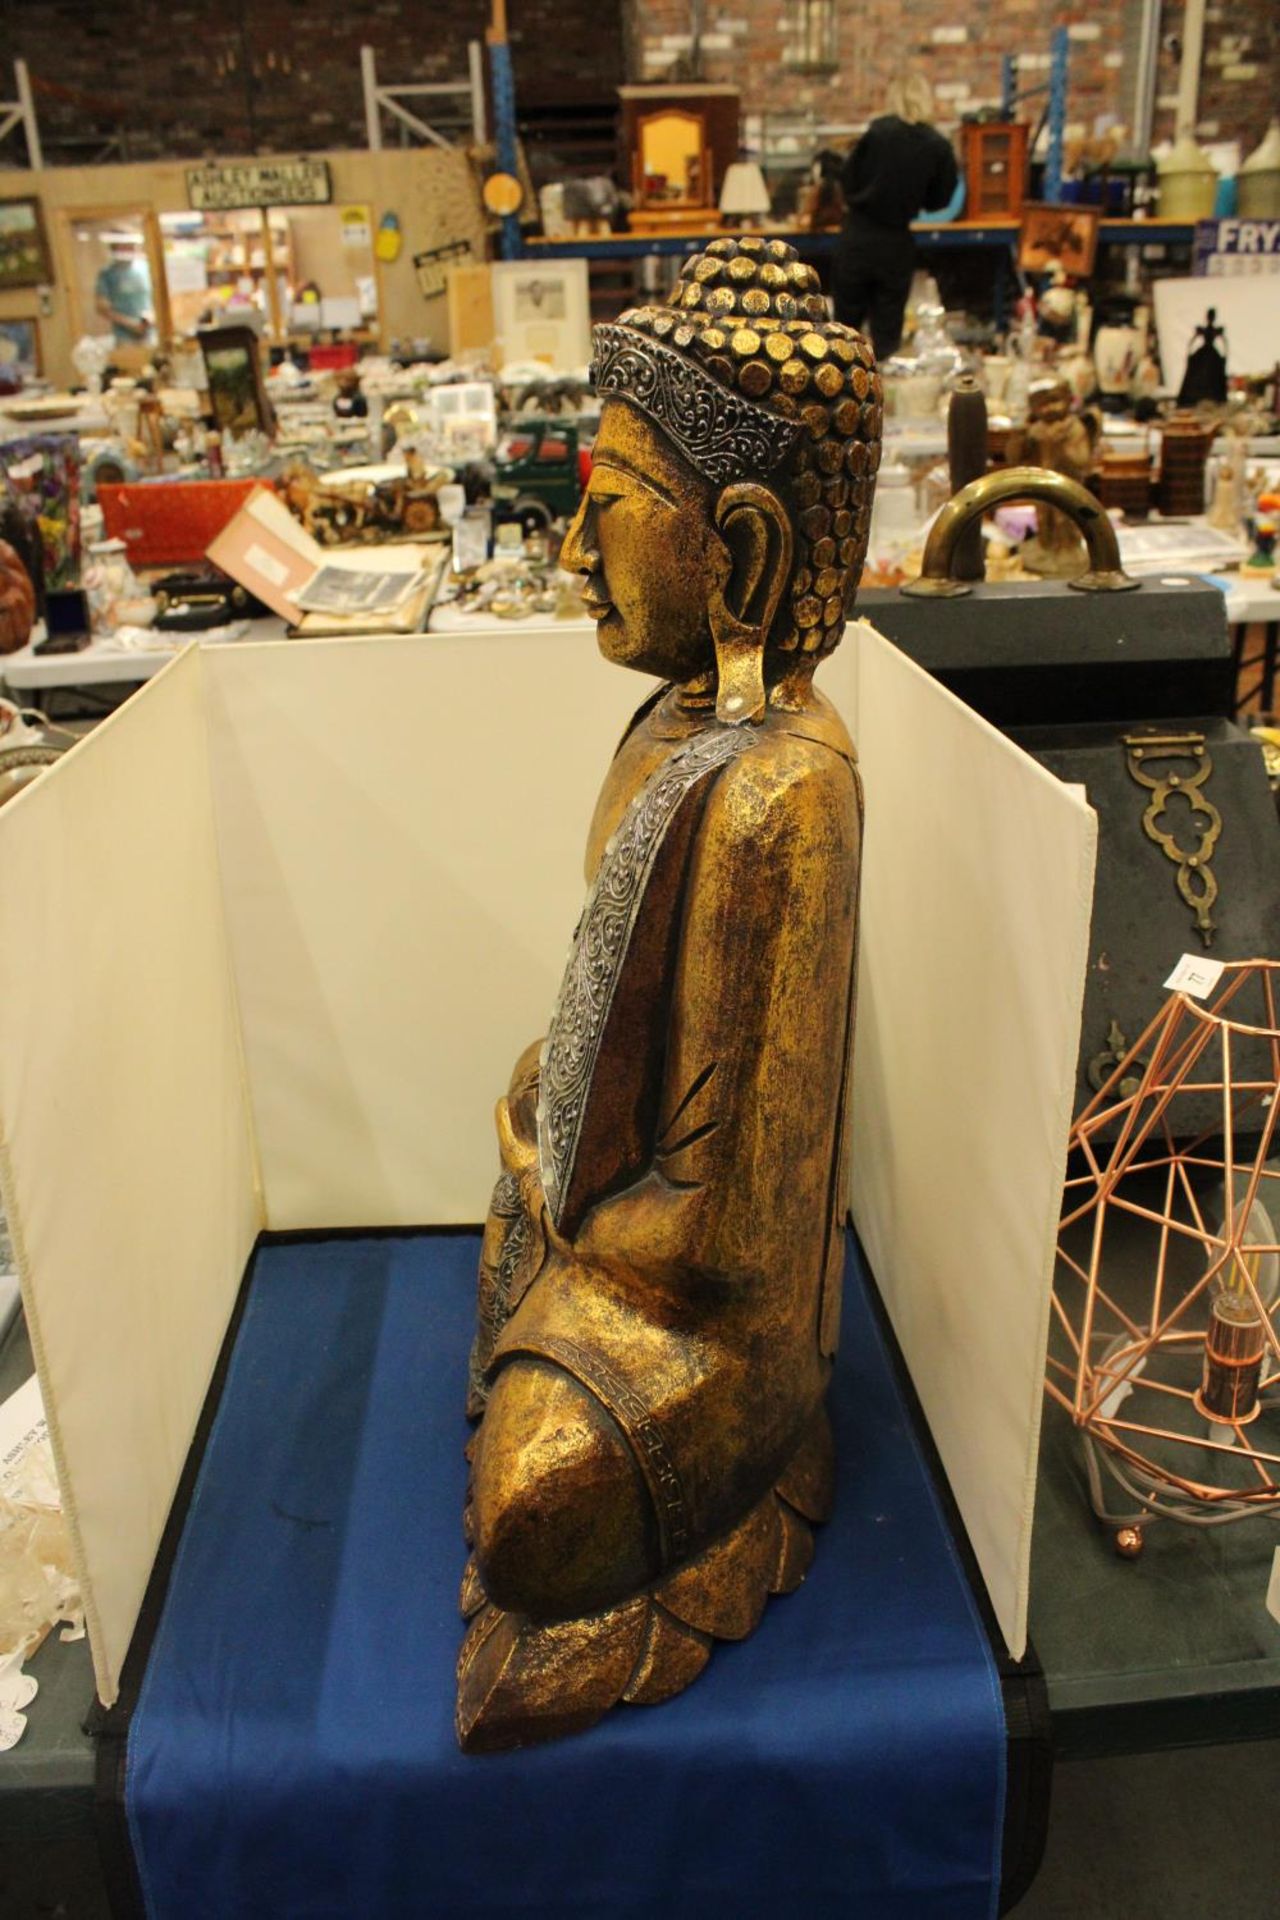 A LARGE GILDED MEDIATING BUDDAH FIGURE 24" TALL - Image 2 of 4